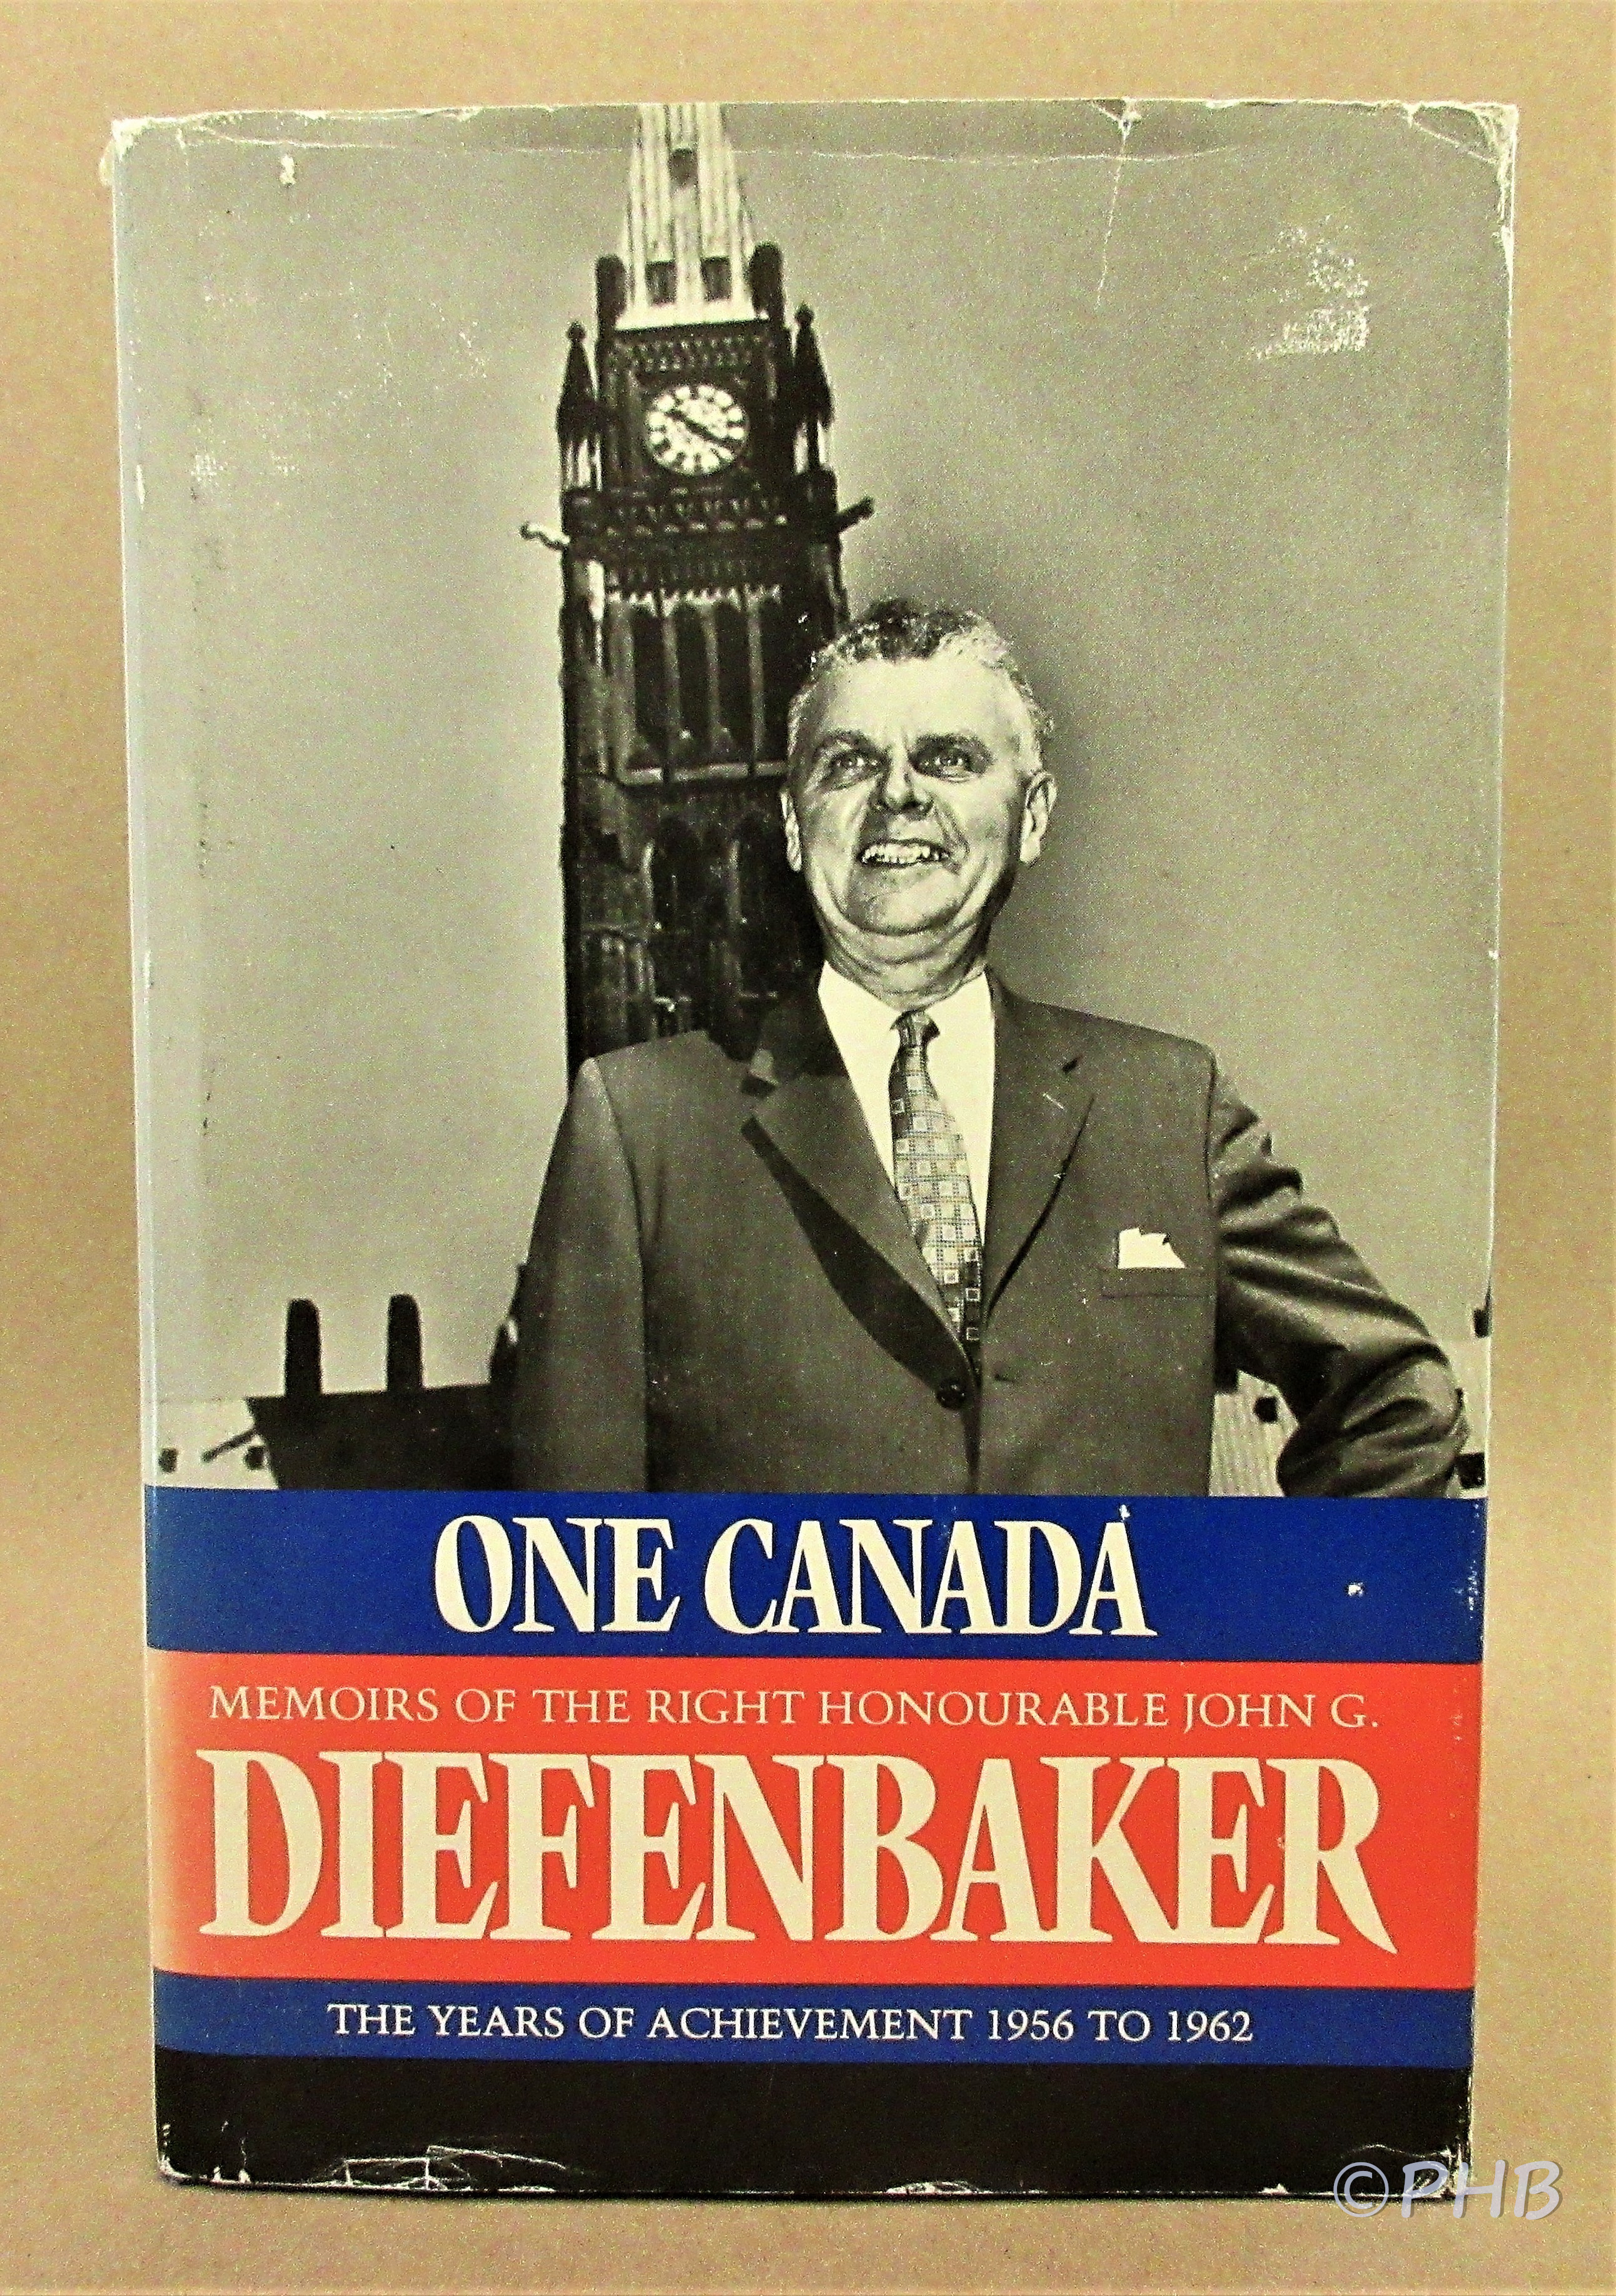 One Canada - Memoirs of the Right Honourable John G. Diefenbaker: The Years of Achievement 1956 to 1962 - Diefenbaker, John G.